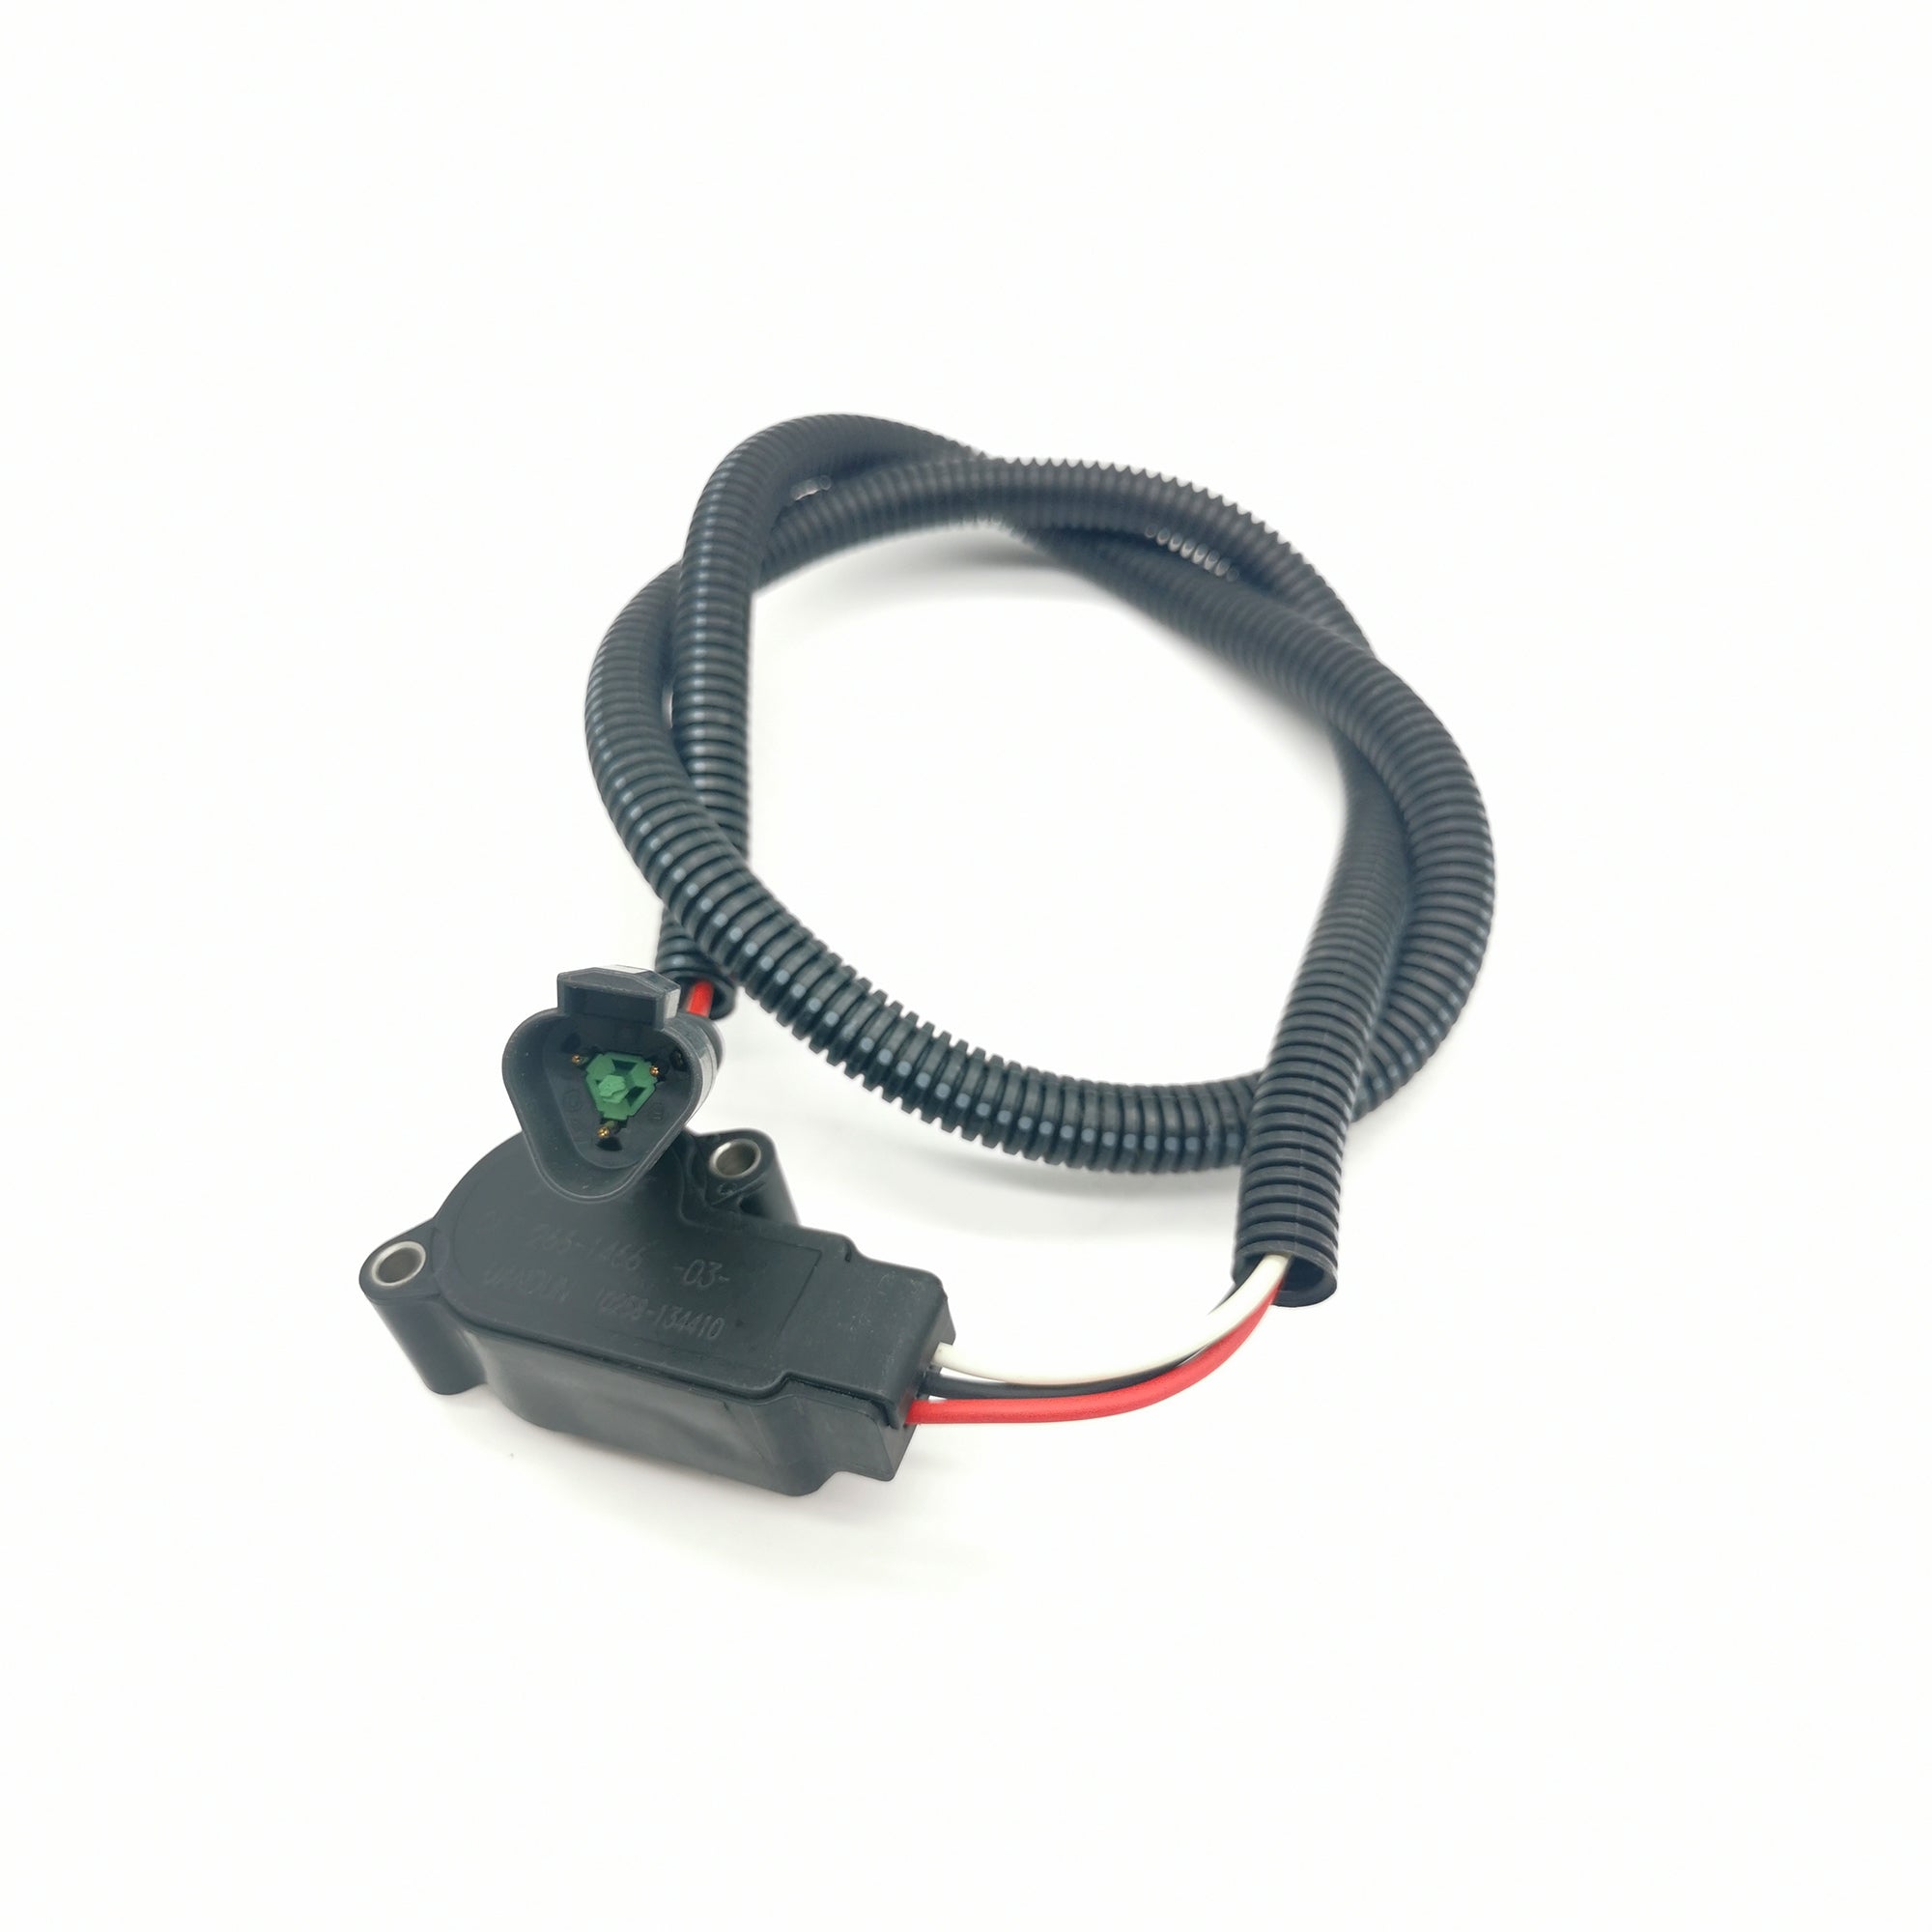 New Throttle Position Sensor with Triangle Plug 266-1466 Compatible with Caterpillar Wheel Tractor 623G 623H 627F 621B 621G 621H Wheel Loader 950G II 950H 950K 938G II 962G II - KUDUPARTS